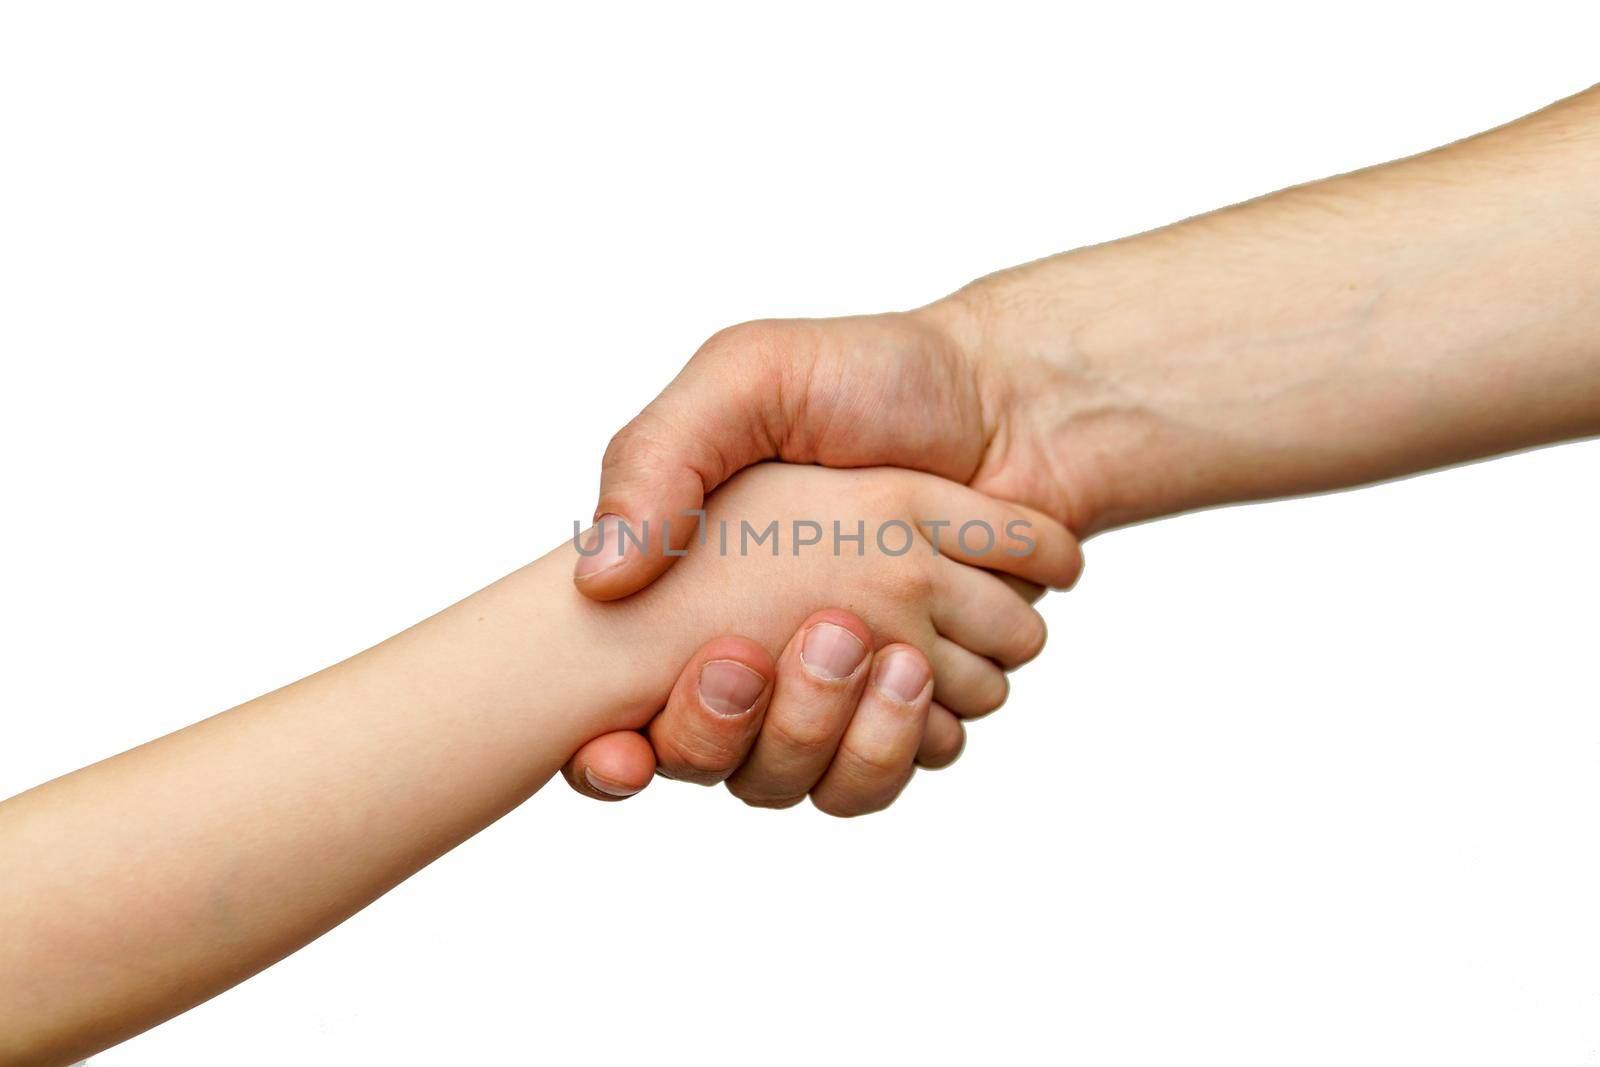 Hands squeeze each other against a white background isolated by 89167702191